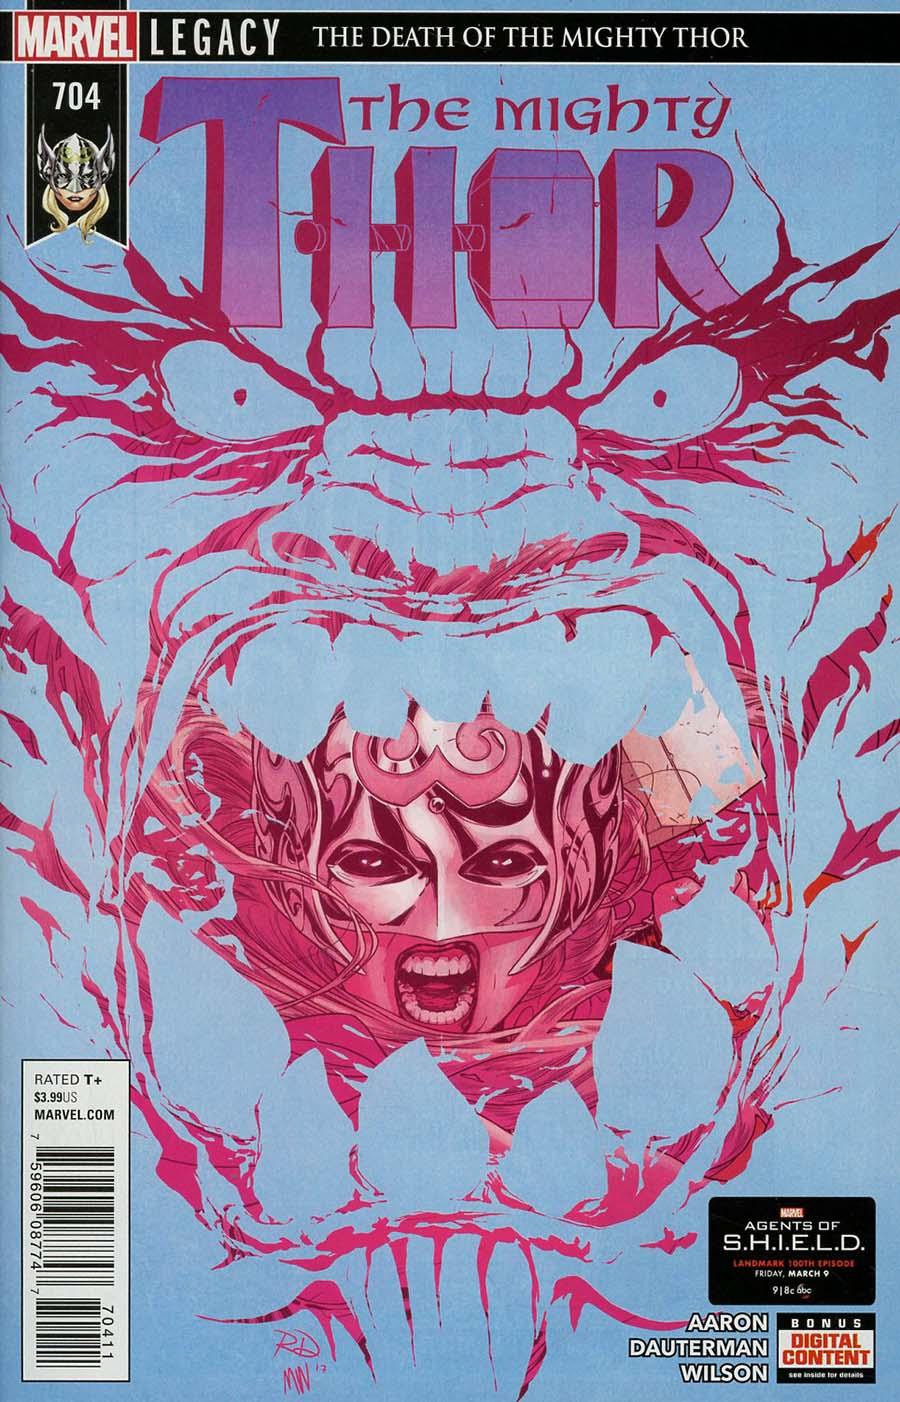 The Mighty Thor Vol. 2 #704